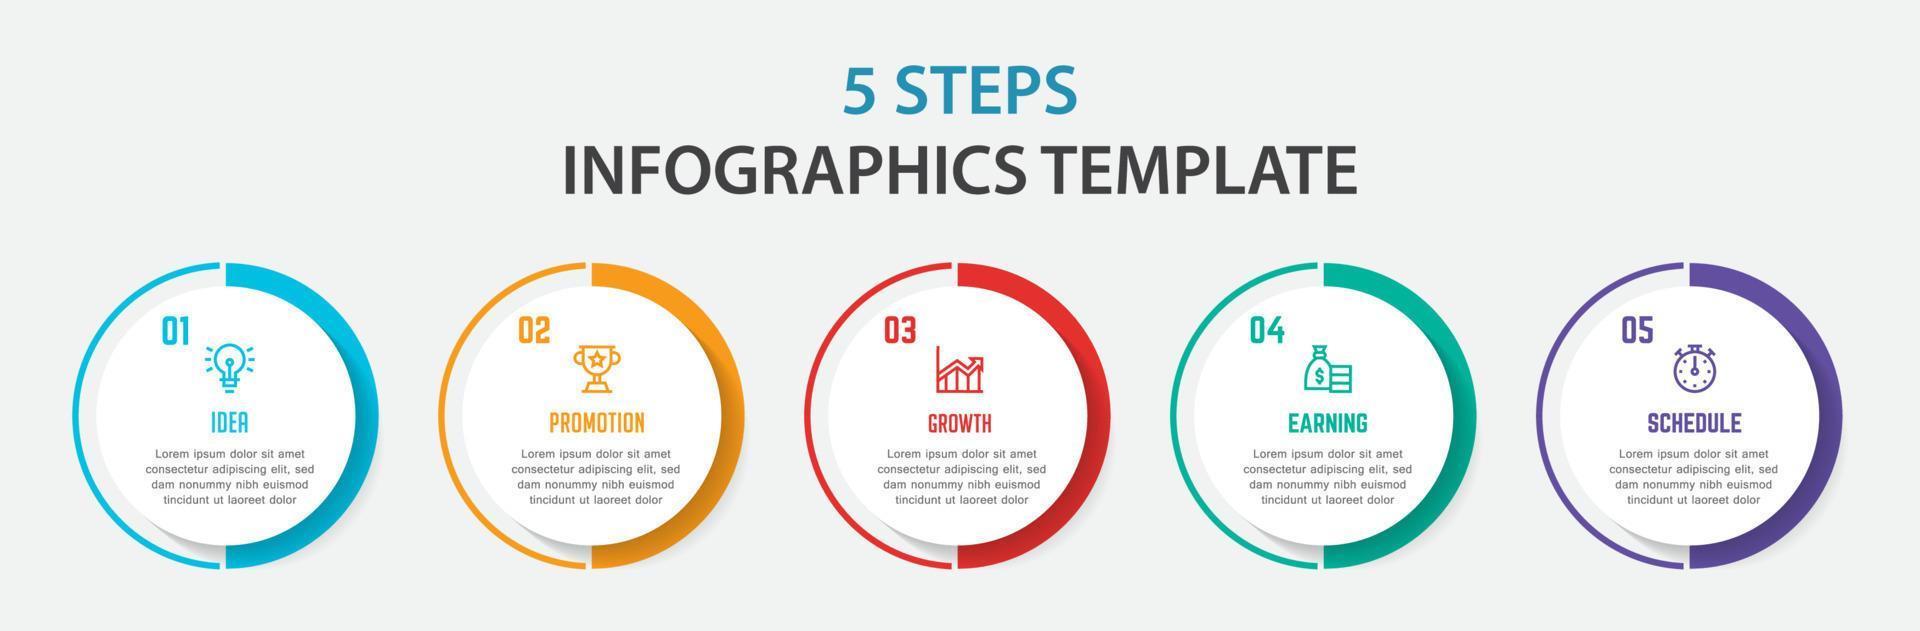 business infographic element template, step process template vector